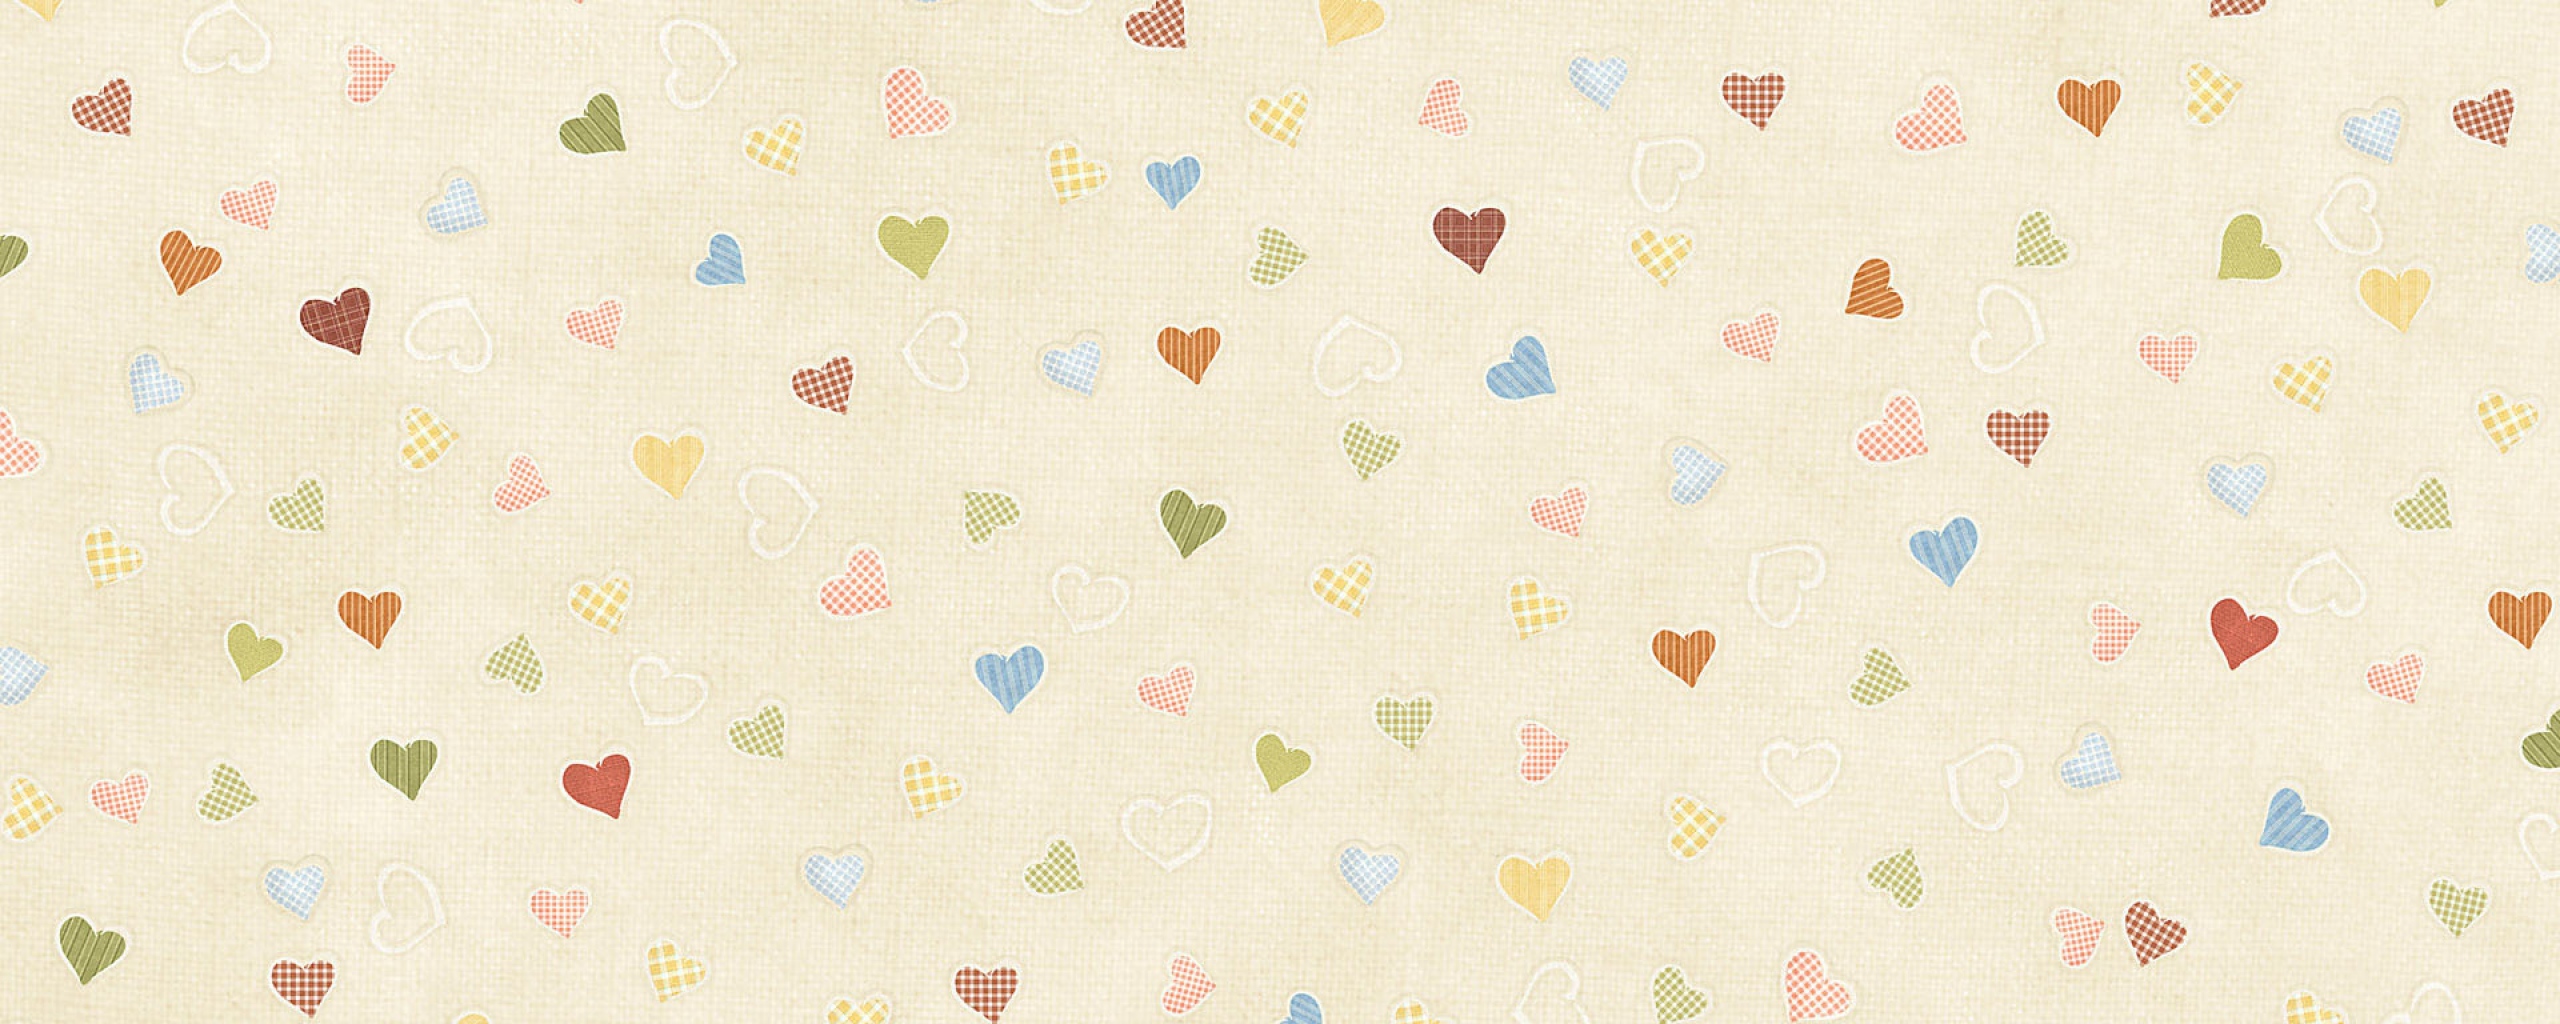 Download Wallpaper 2560x1024 Pictures, Baby, Texture, Surface ...